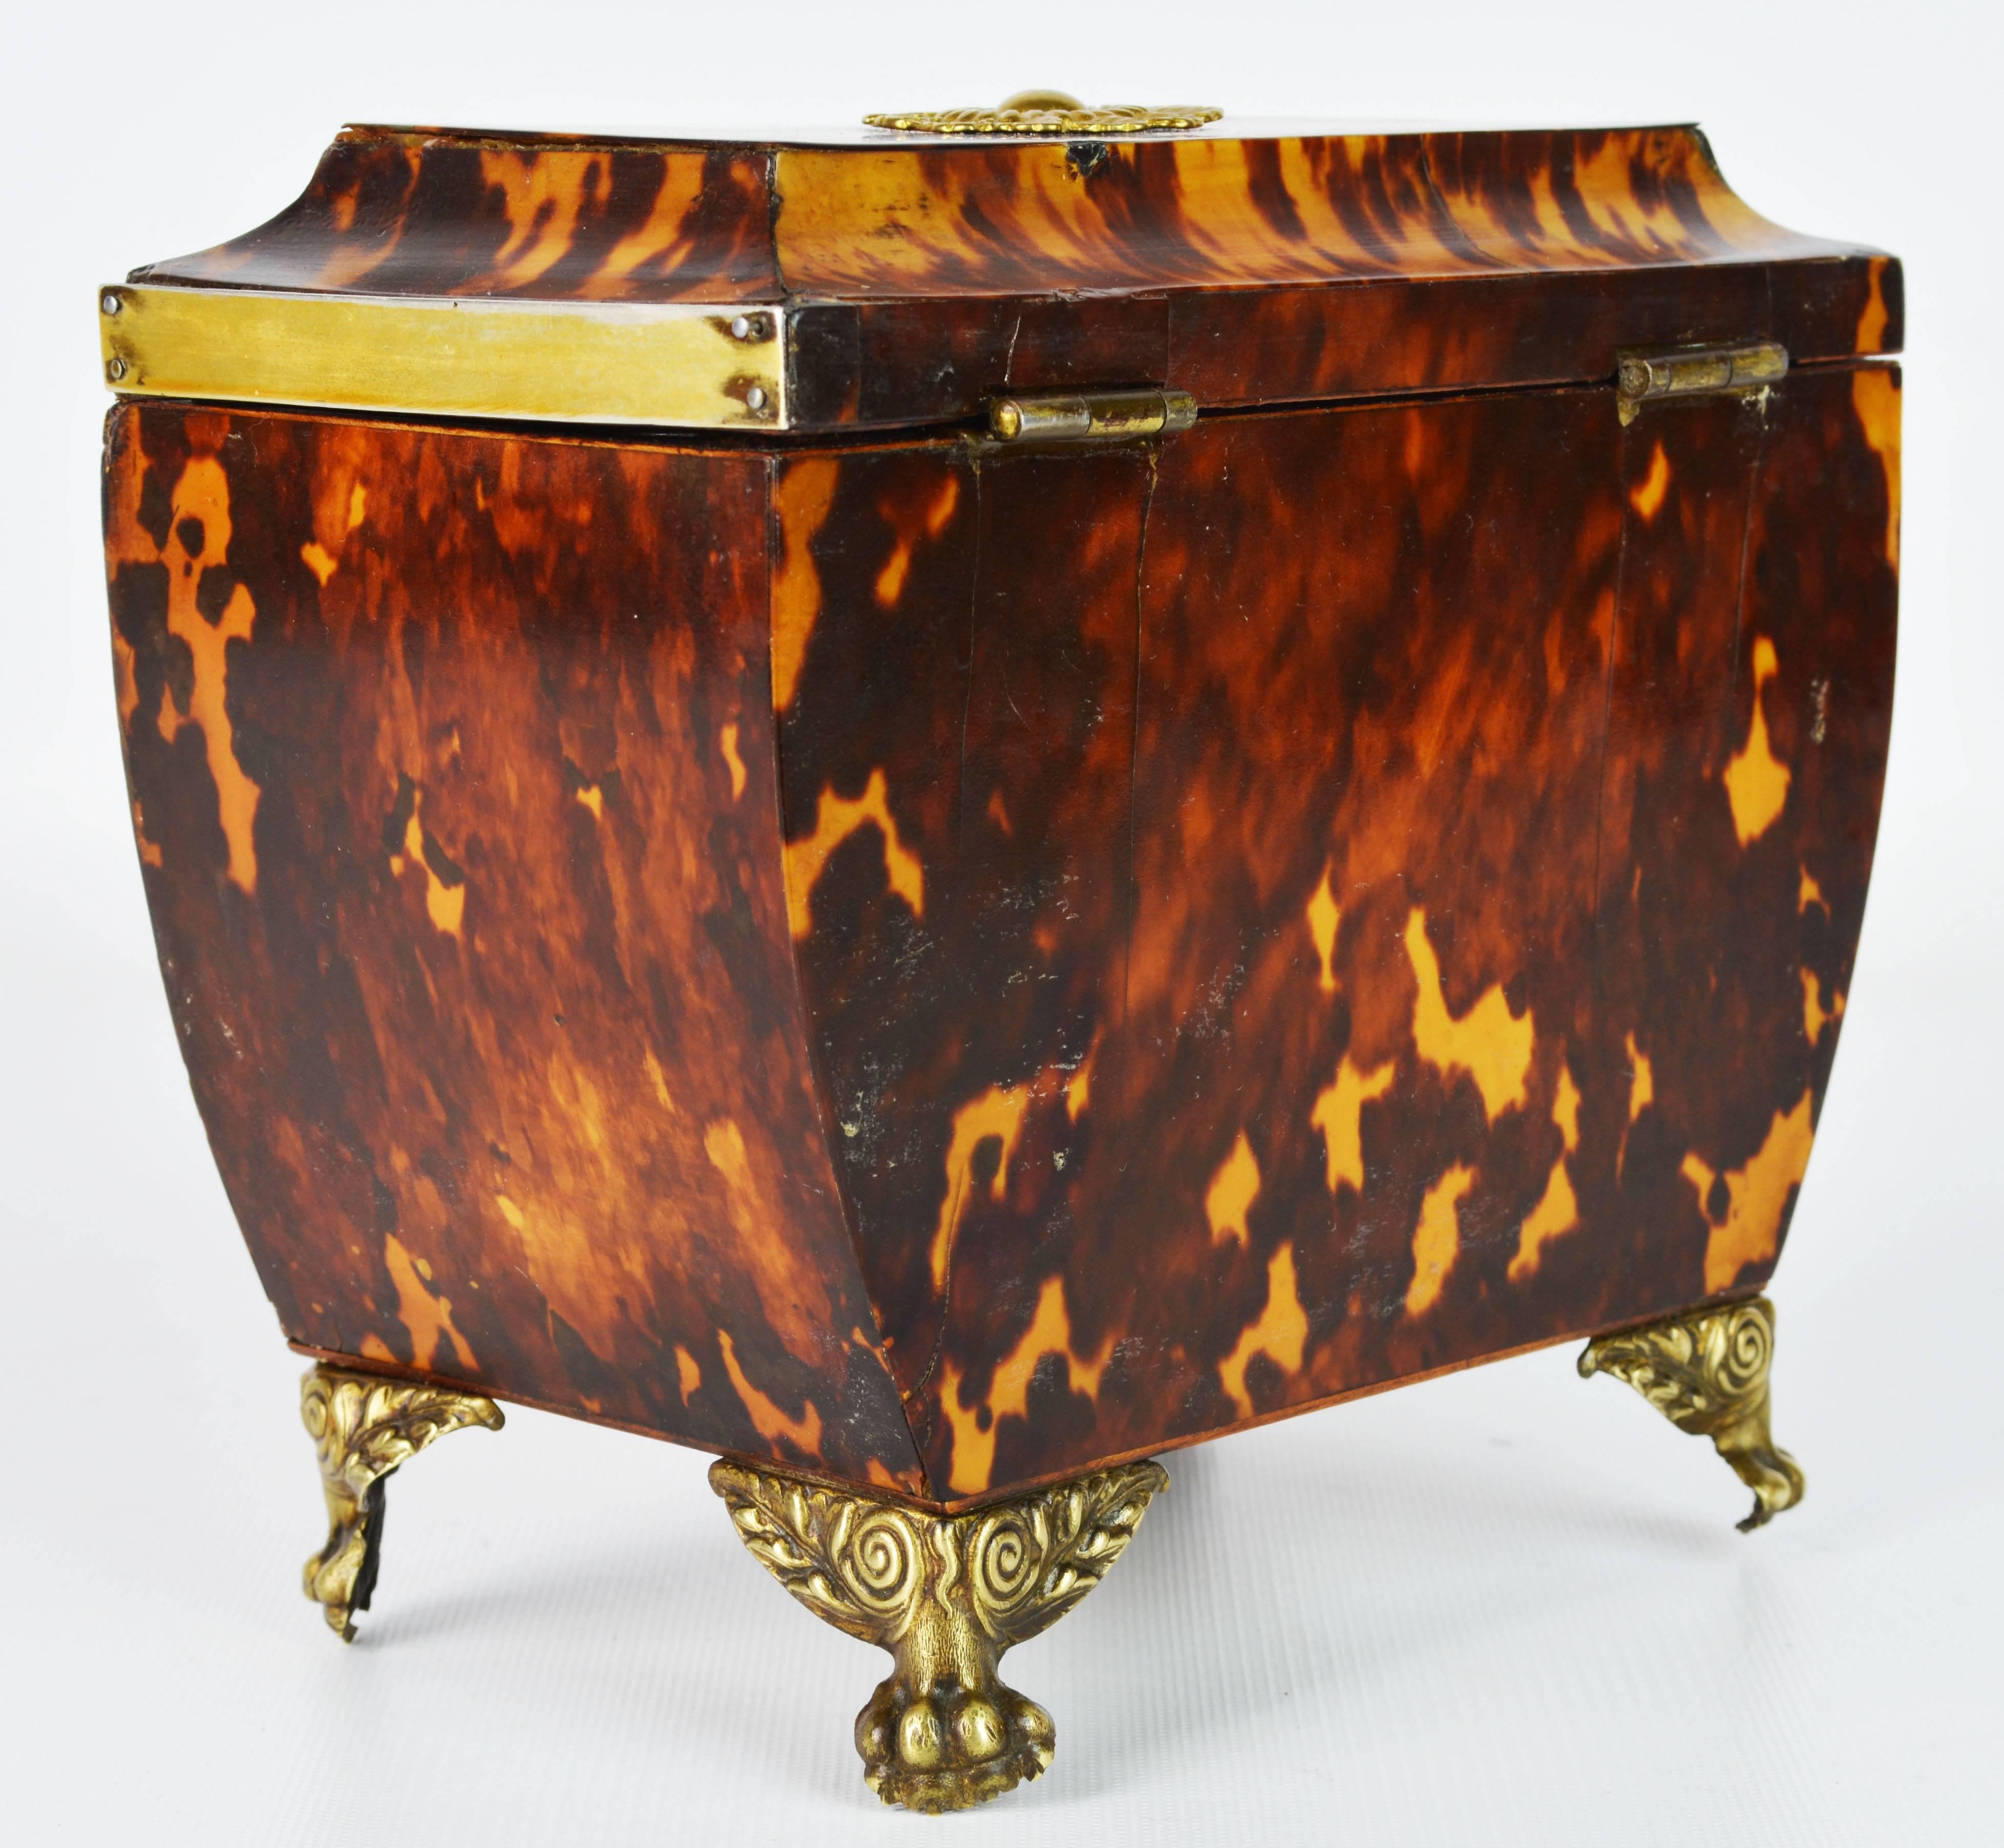 Brass Lovely English Regency Tortoiseshell Footed Tea Caddy with Intach Interior